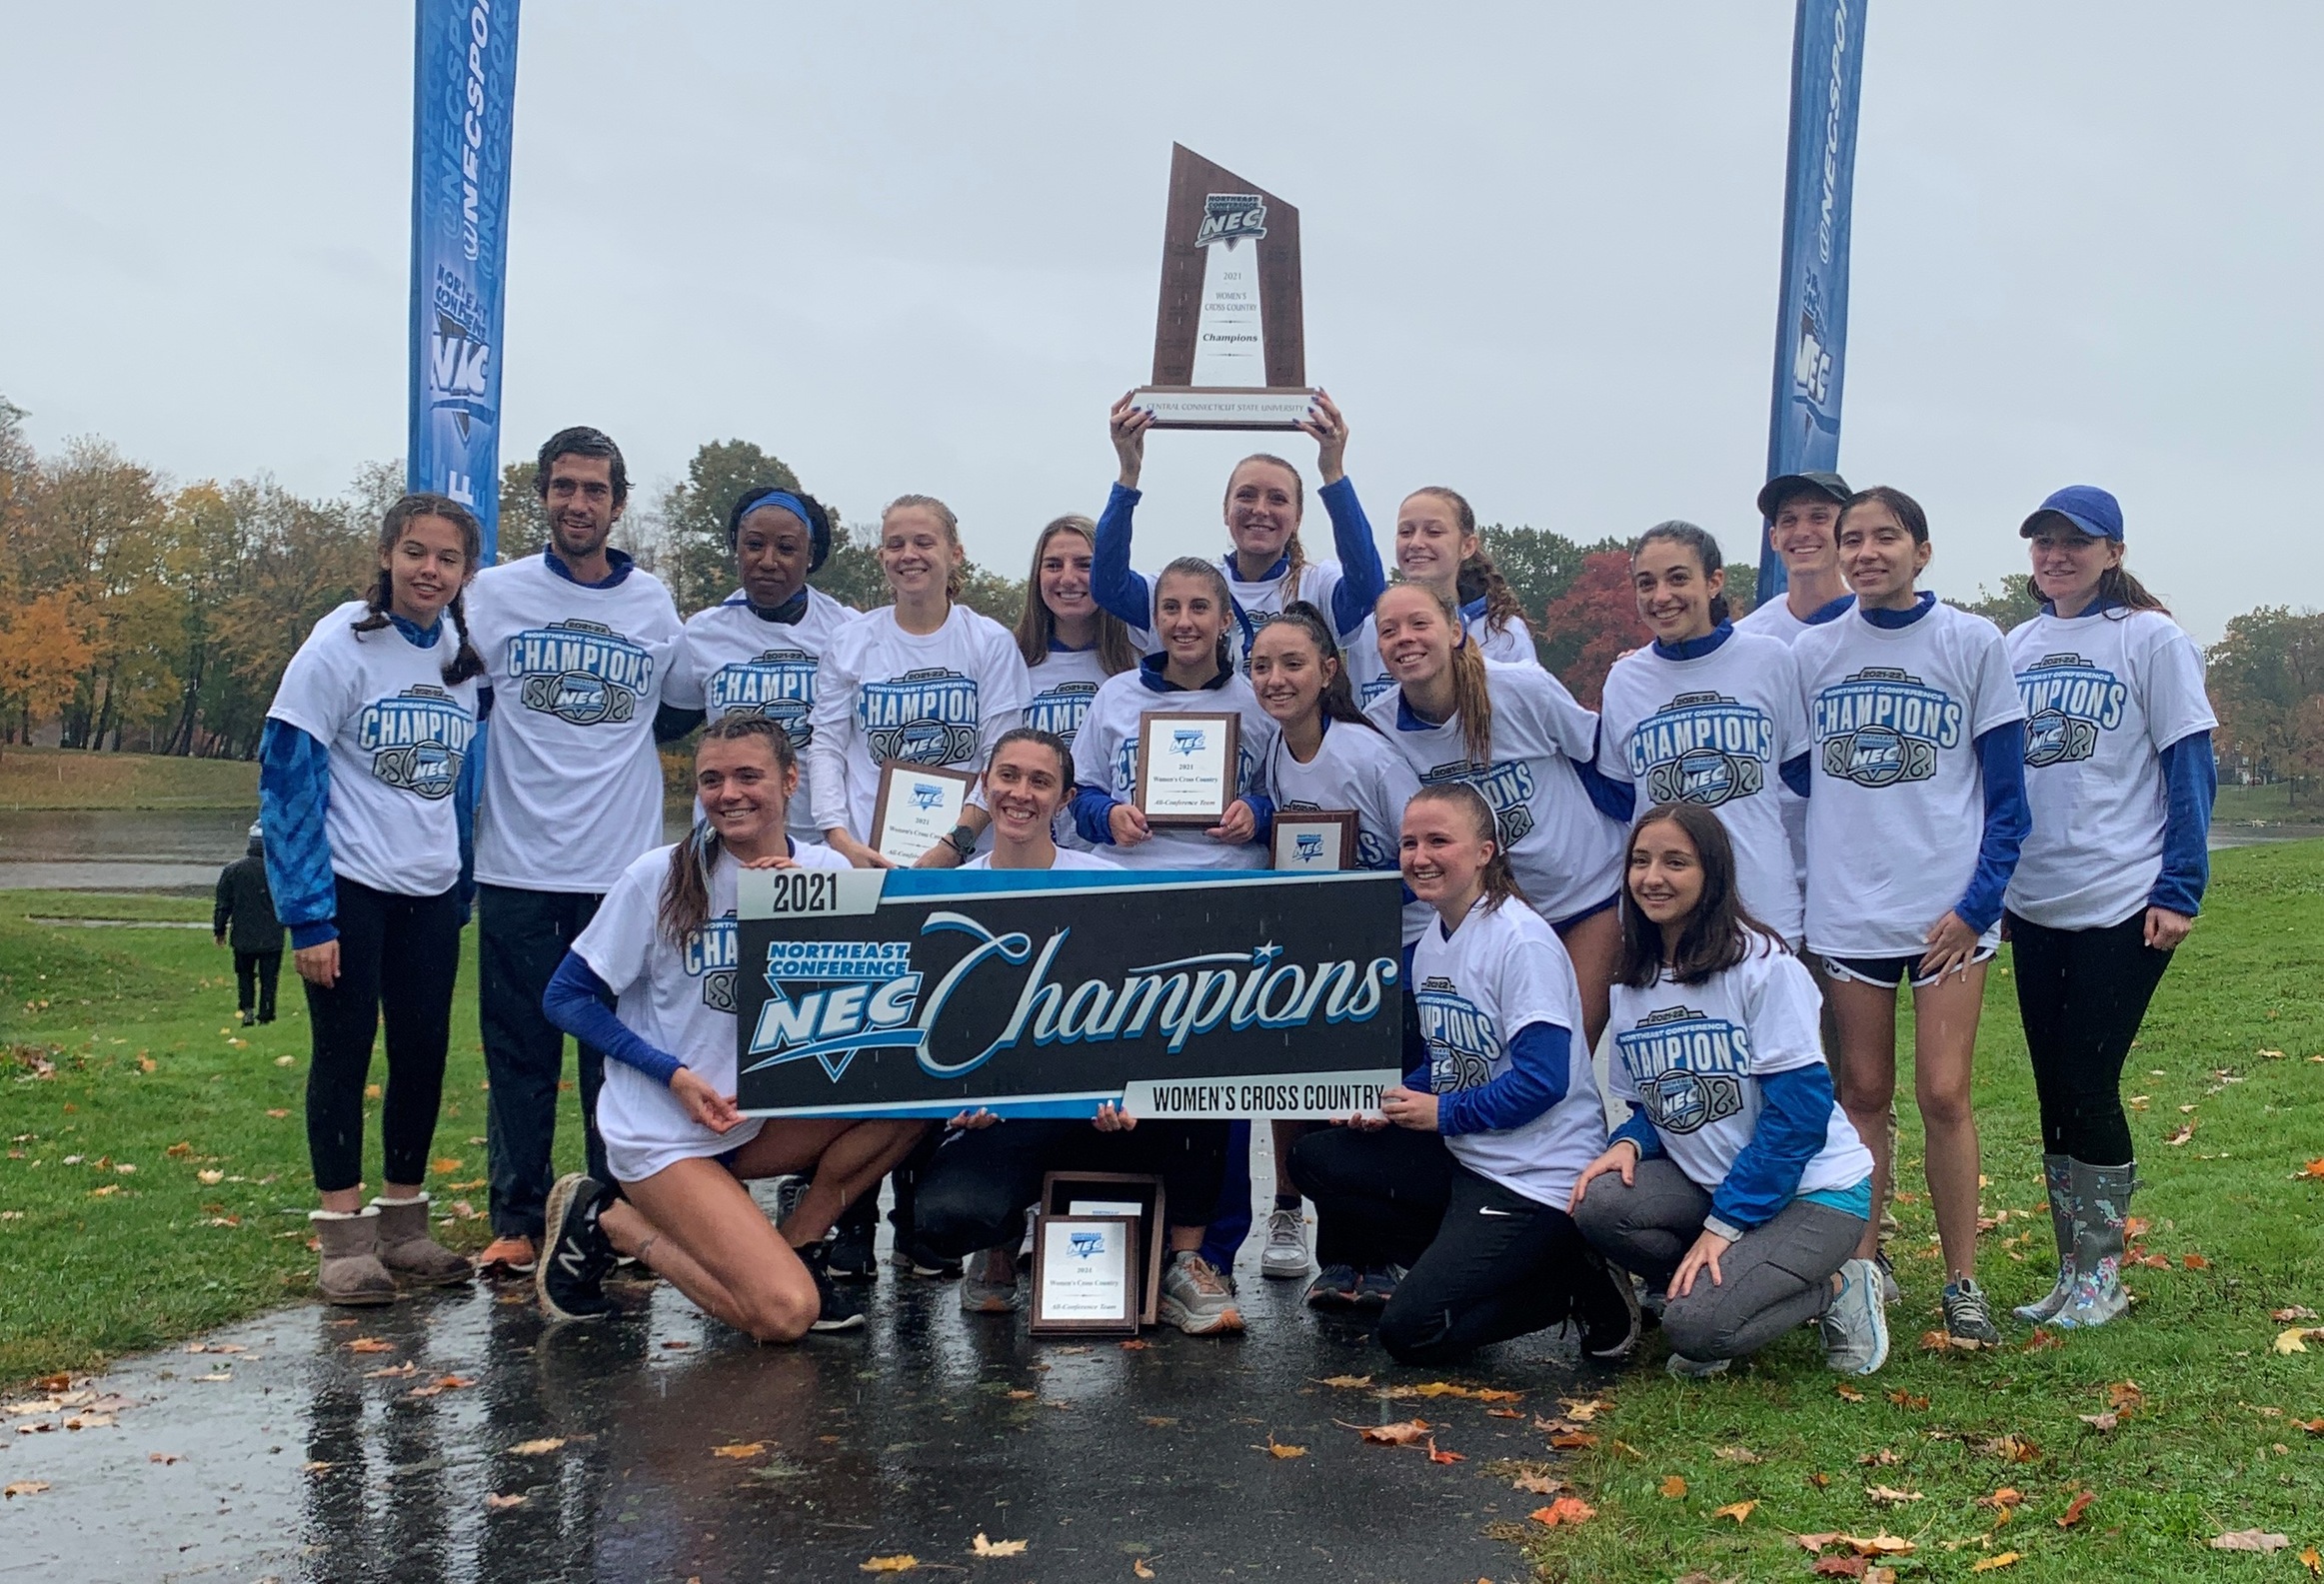 Women's Cross Country Wins Fourth Straight NEC Title